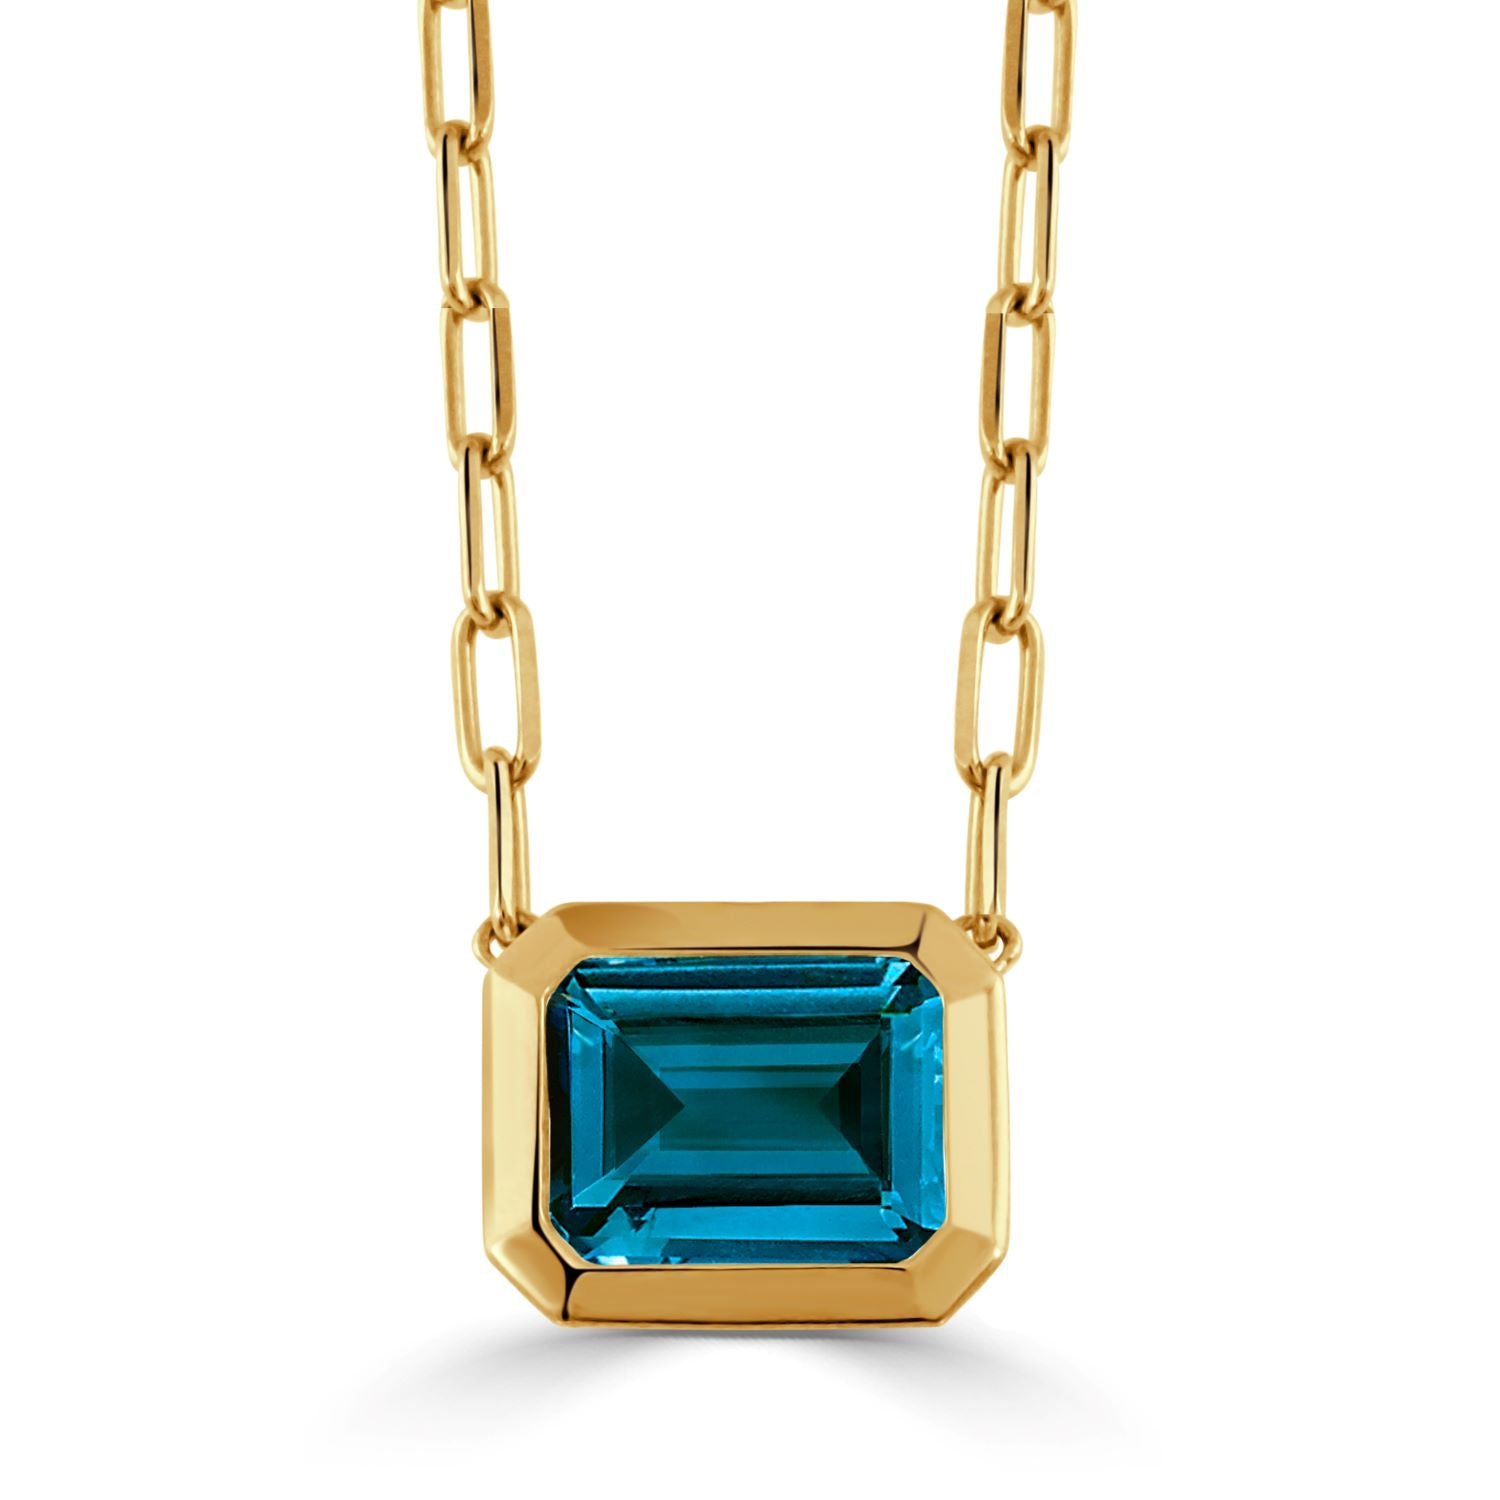 18K YELLOW GOLD NECKLACE WITH LONDON BLUE TOPAZ CENTER